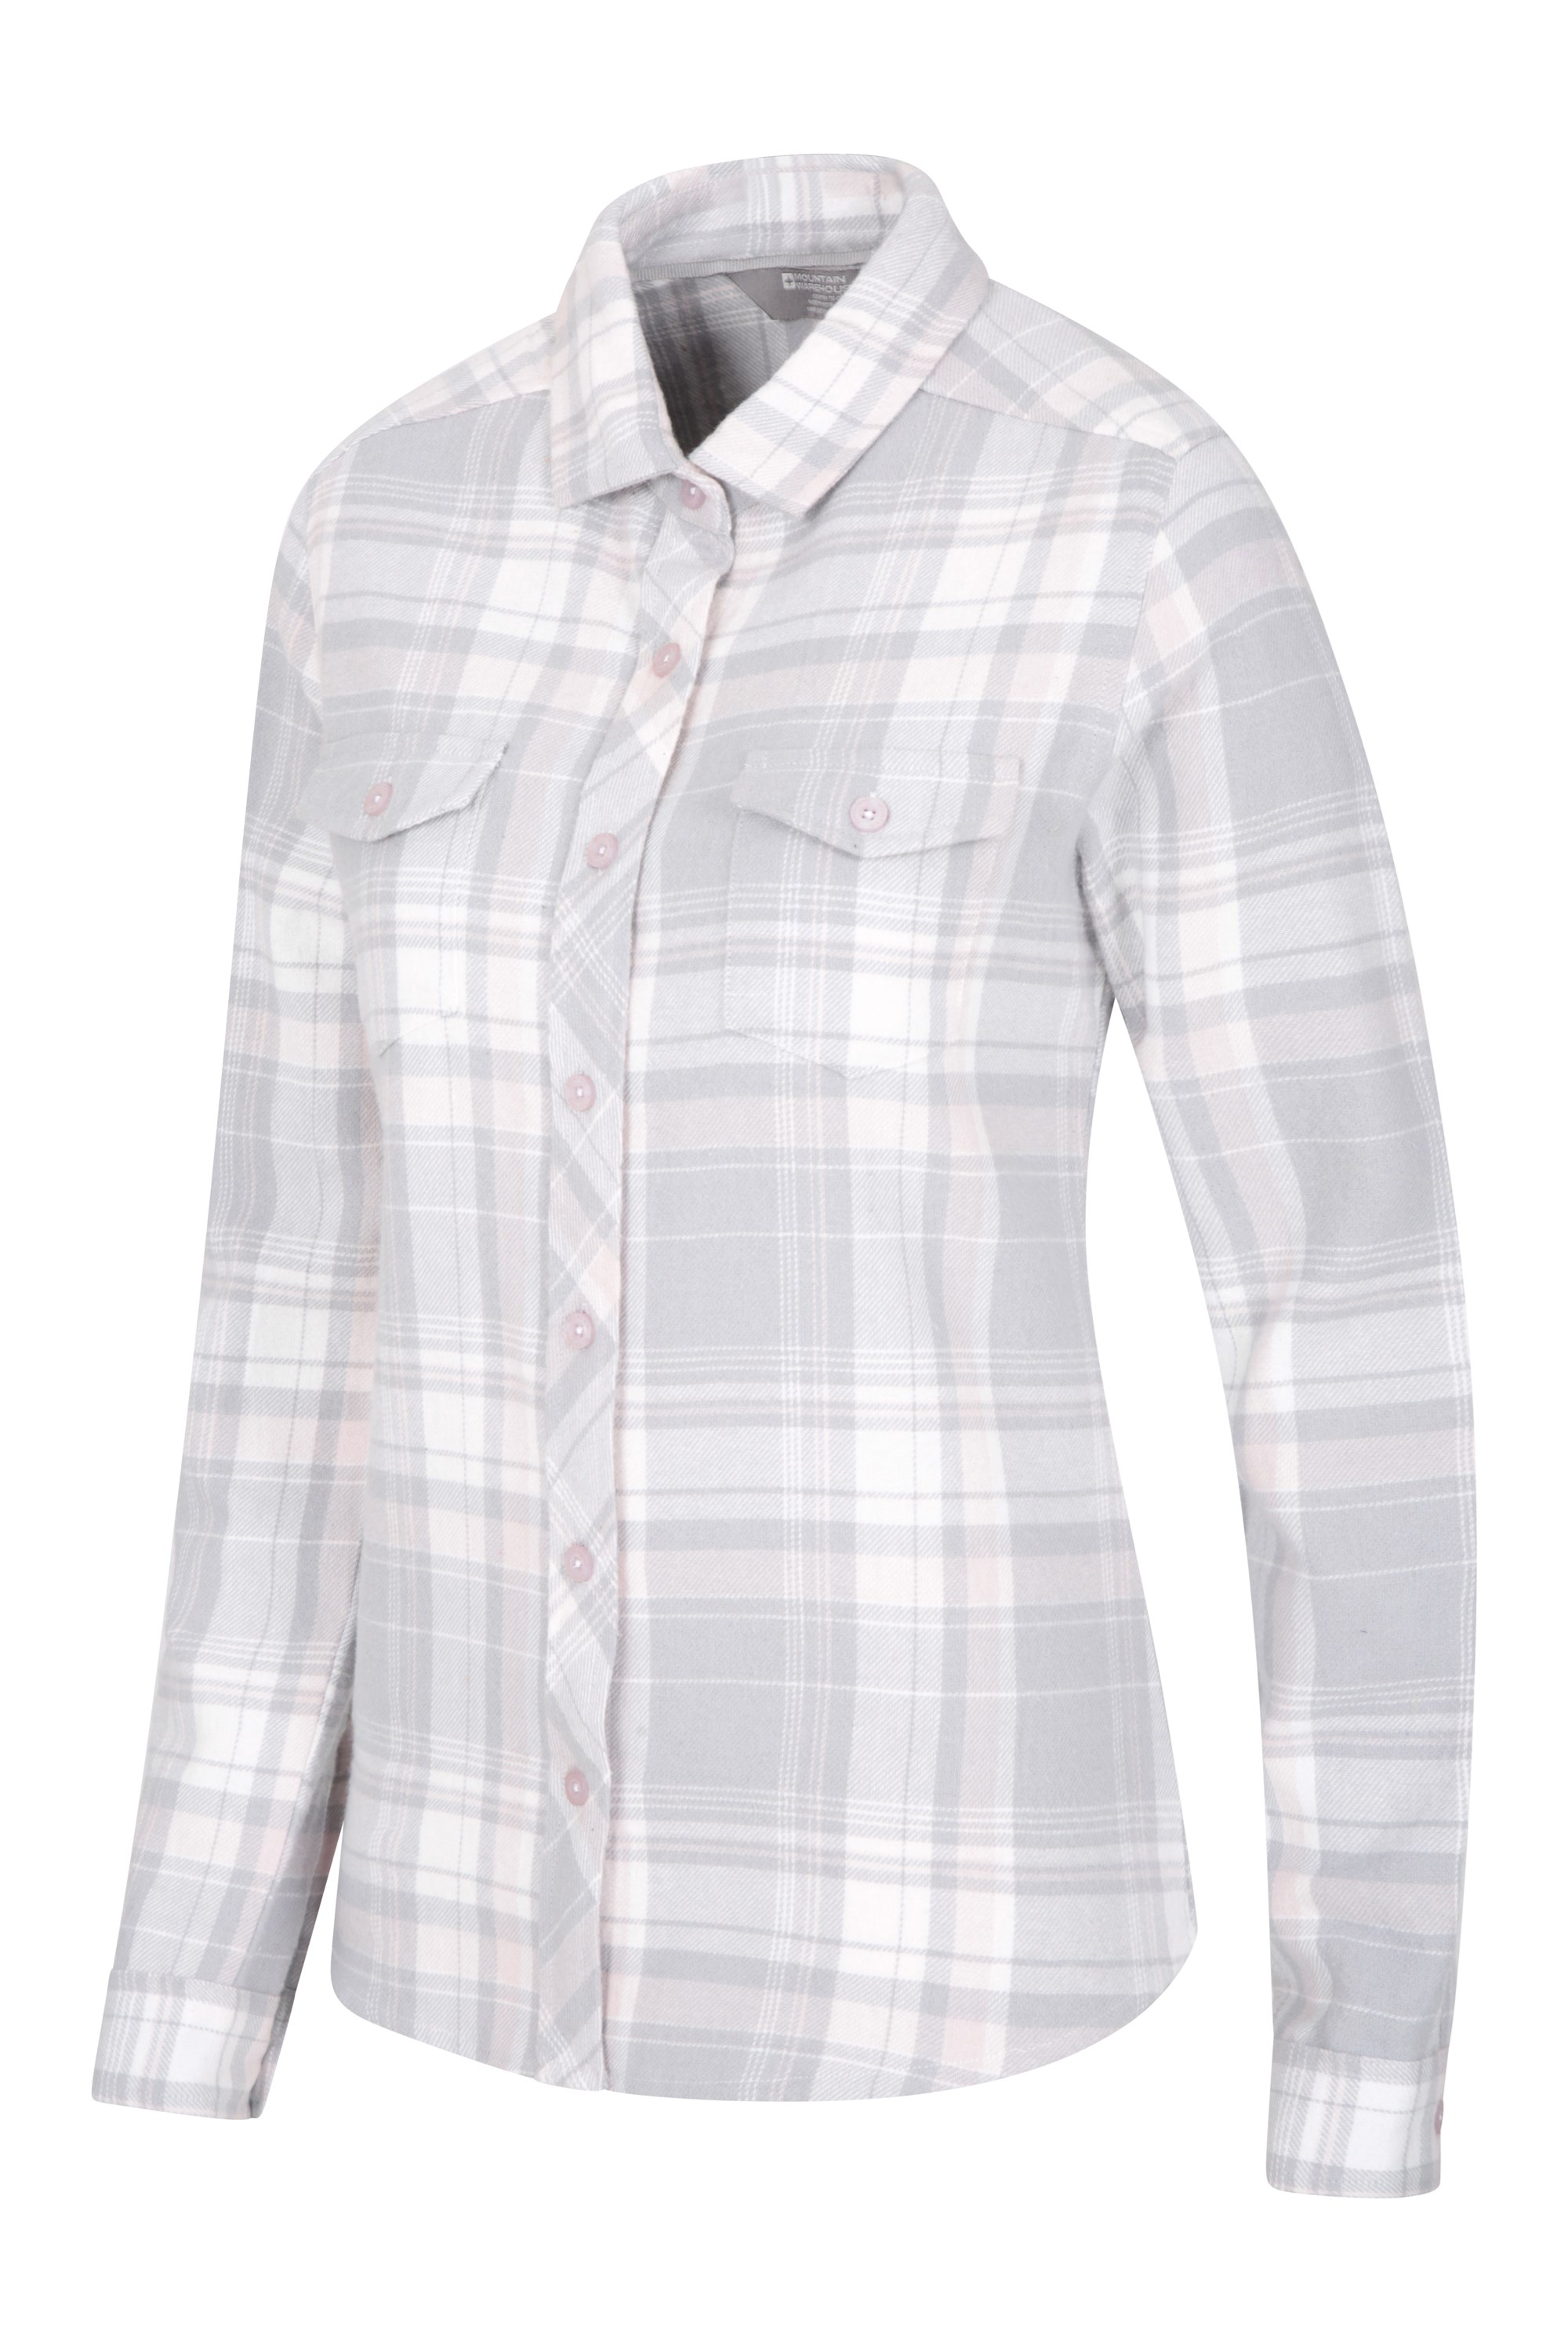 Mountain Warehouse Balsam Womens Brushed Long Line Flannel Shirt - Blue | Size 6